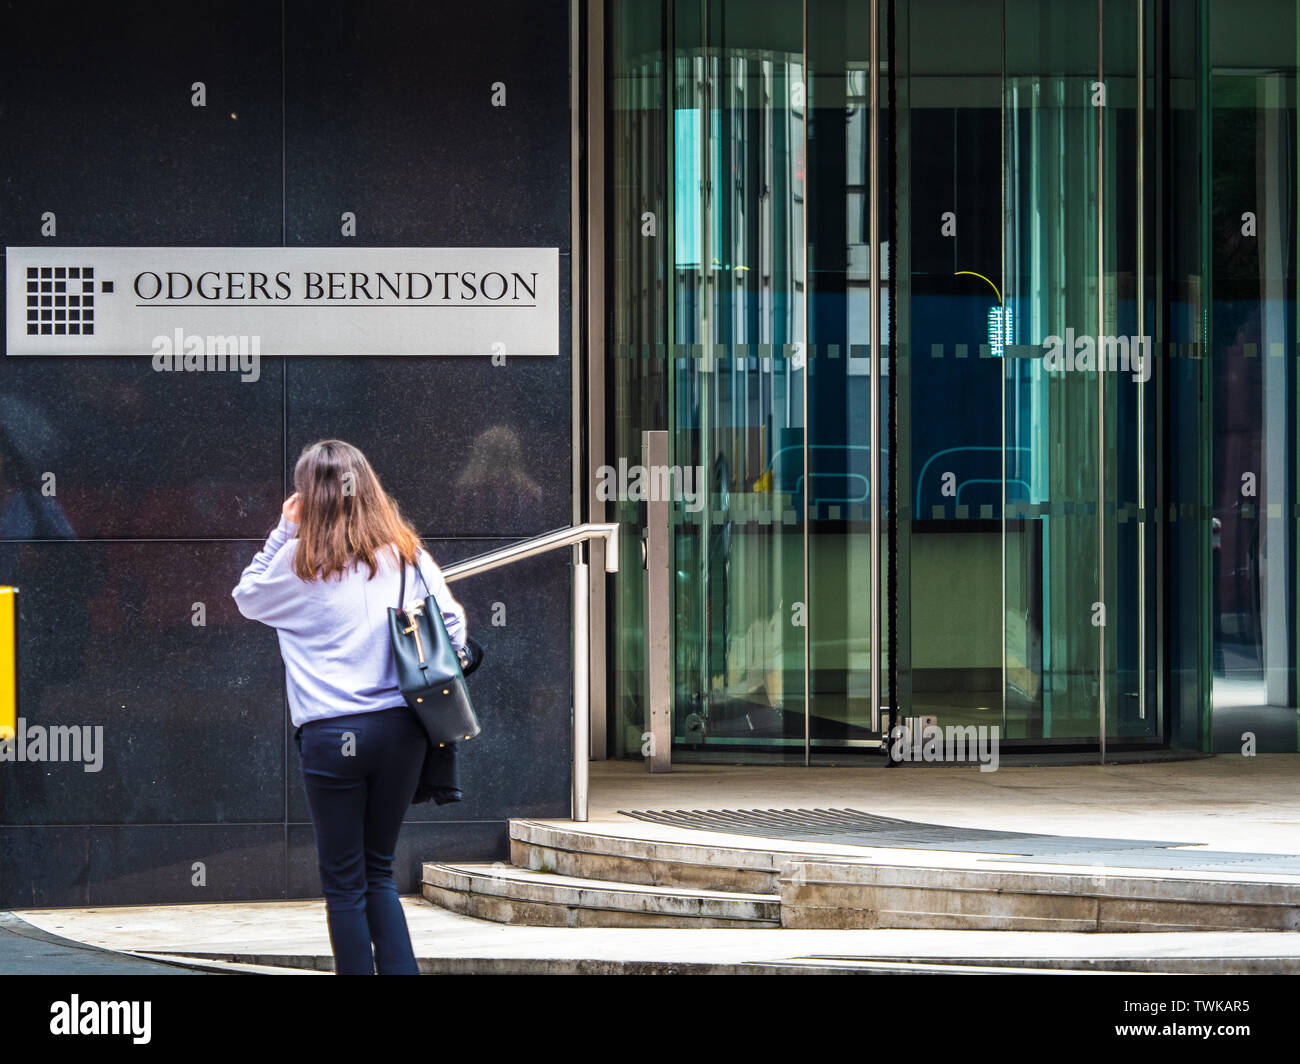 Odgers Berndtson Executive Search and Recruitment Company London Offices on Cannon Street in the City of London Financial District Stock Photo